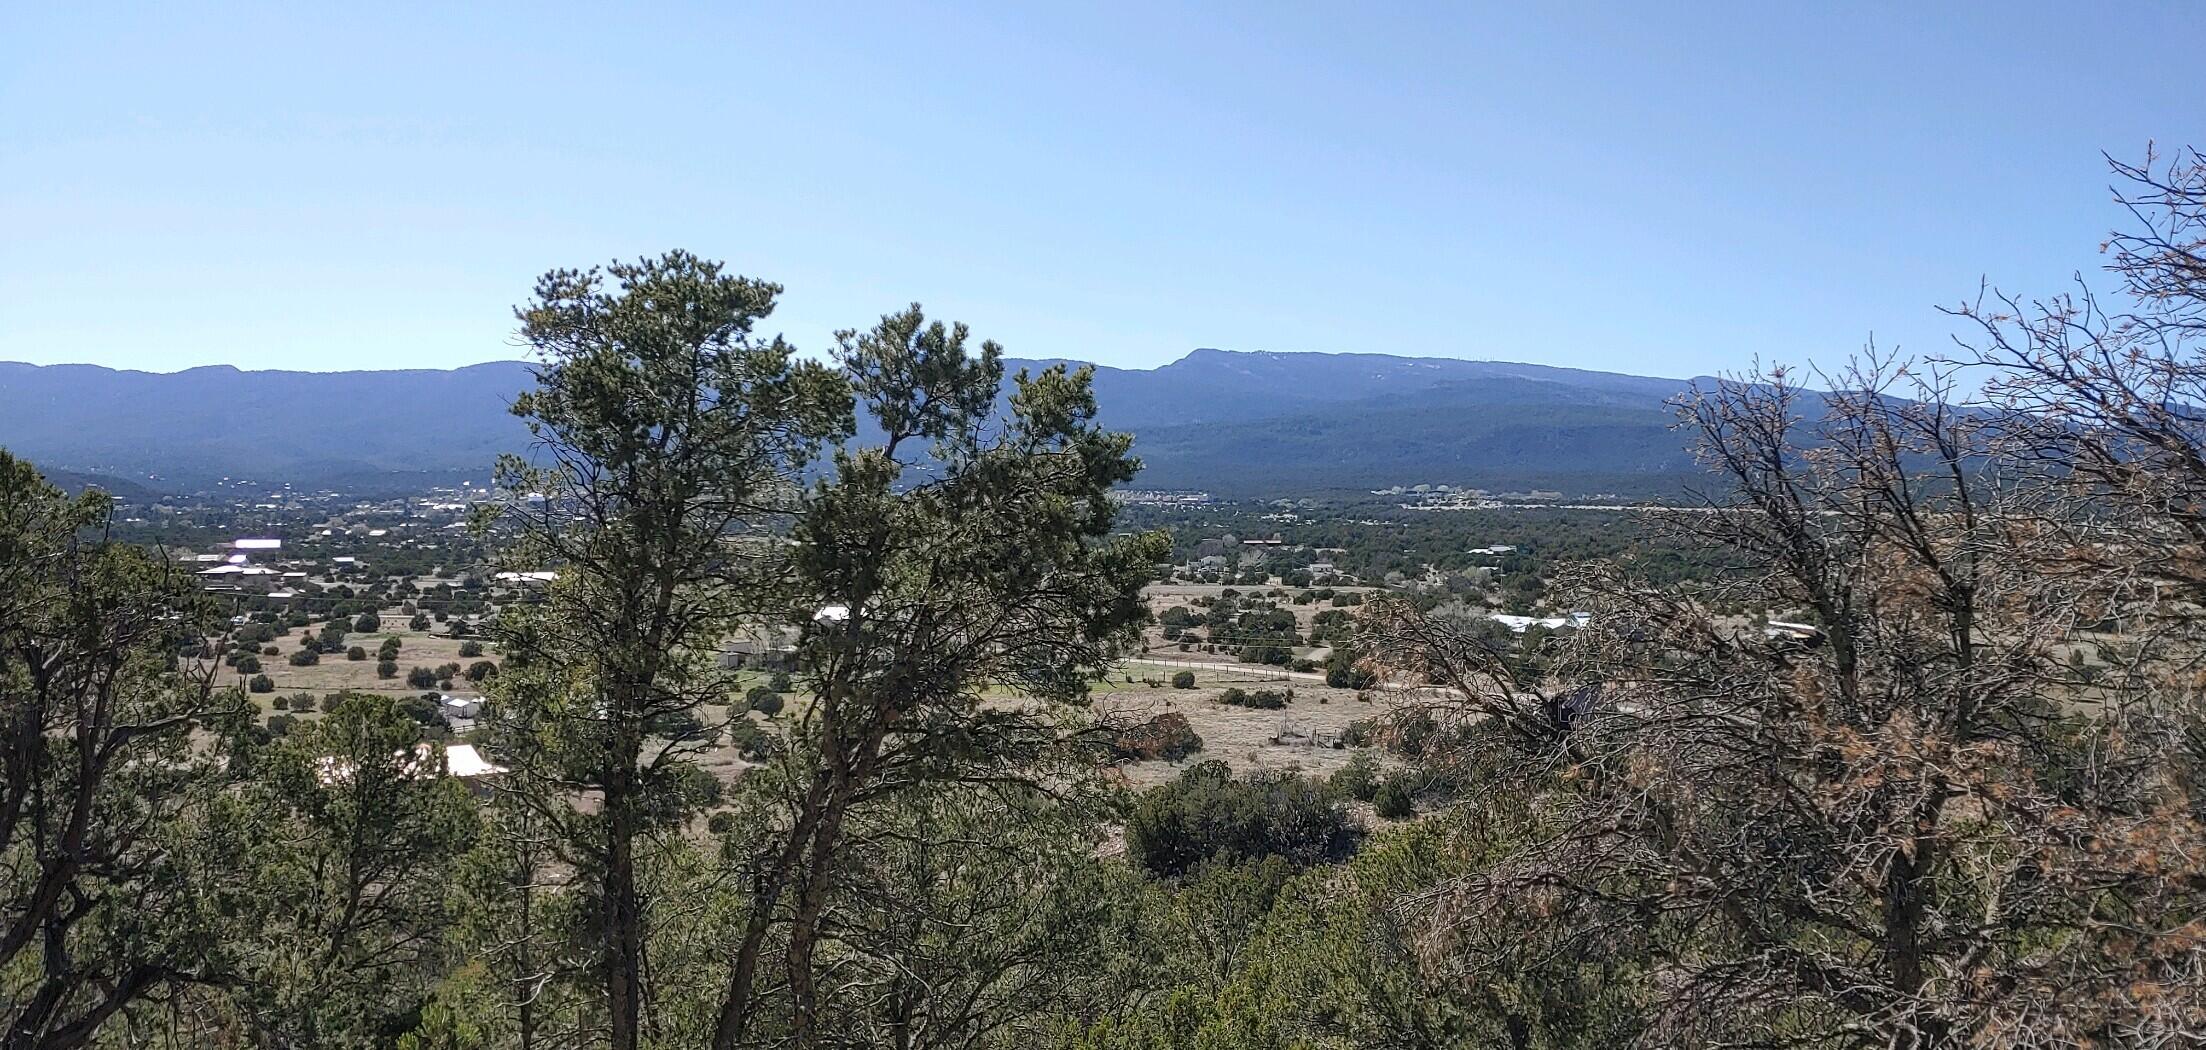 23 Lakeview Drive, Sandia Park, New Mexico 87047, ,Land,For Sale,23 Lakeview Drive,1034362